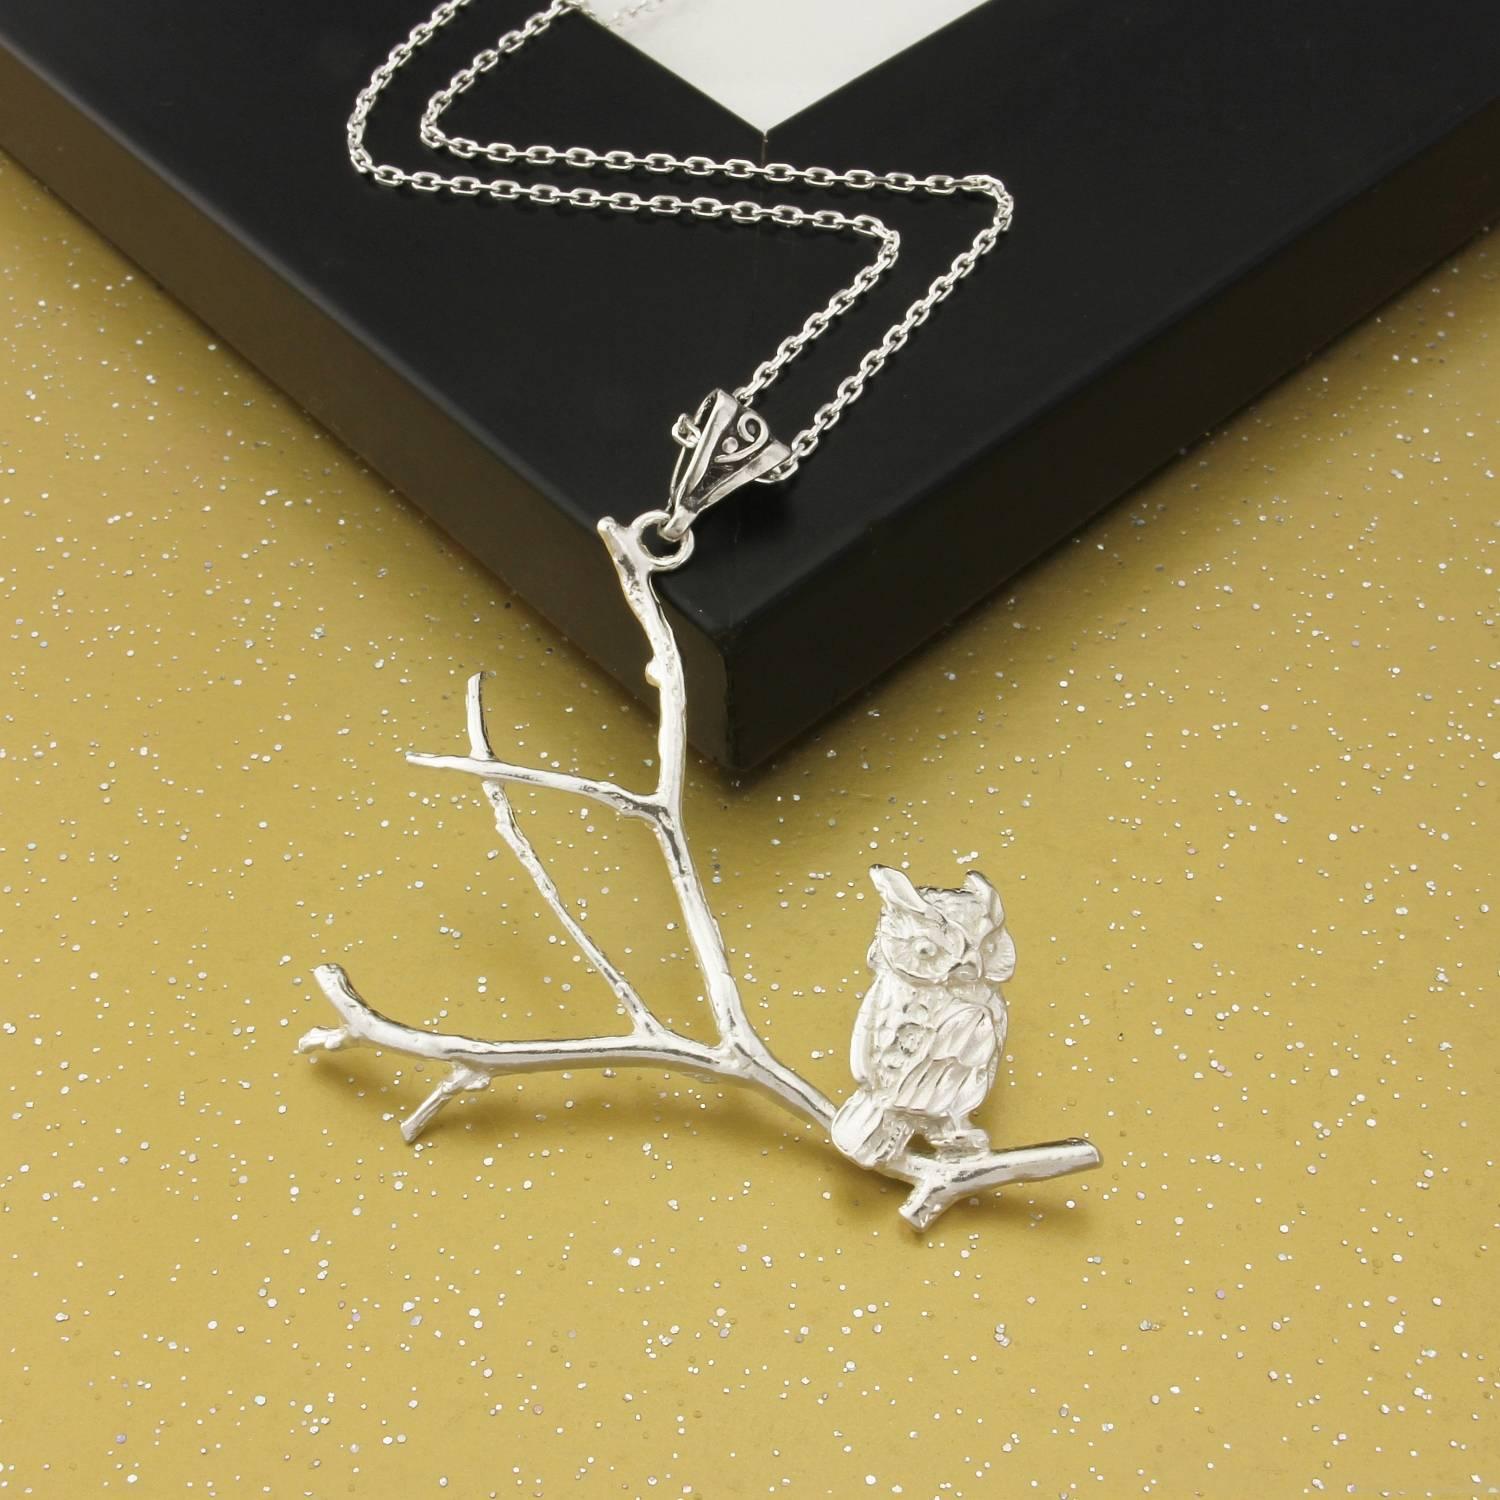 This delicate, feminine Owl on branches necklace, made from solid Sterling Silver, will delight the discerning, artistic owl lover.
The positioning of the owl and the delicate silver branches lend this 3 dimensional pendant a cachet of its own.
The